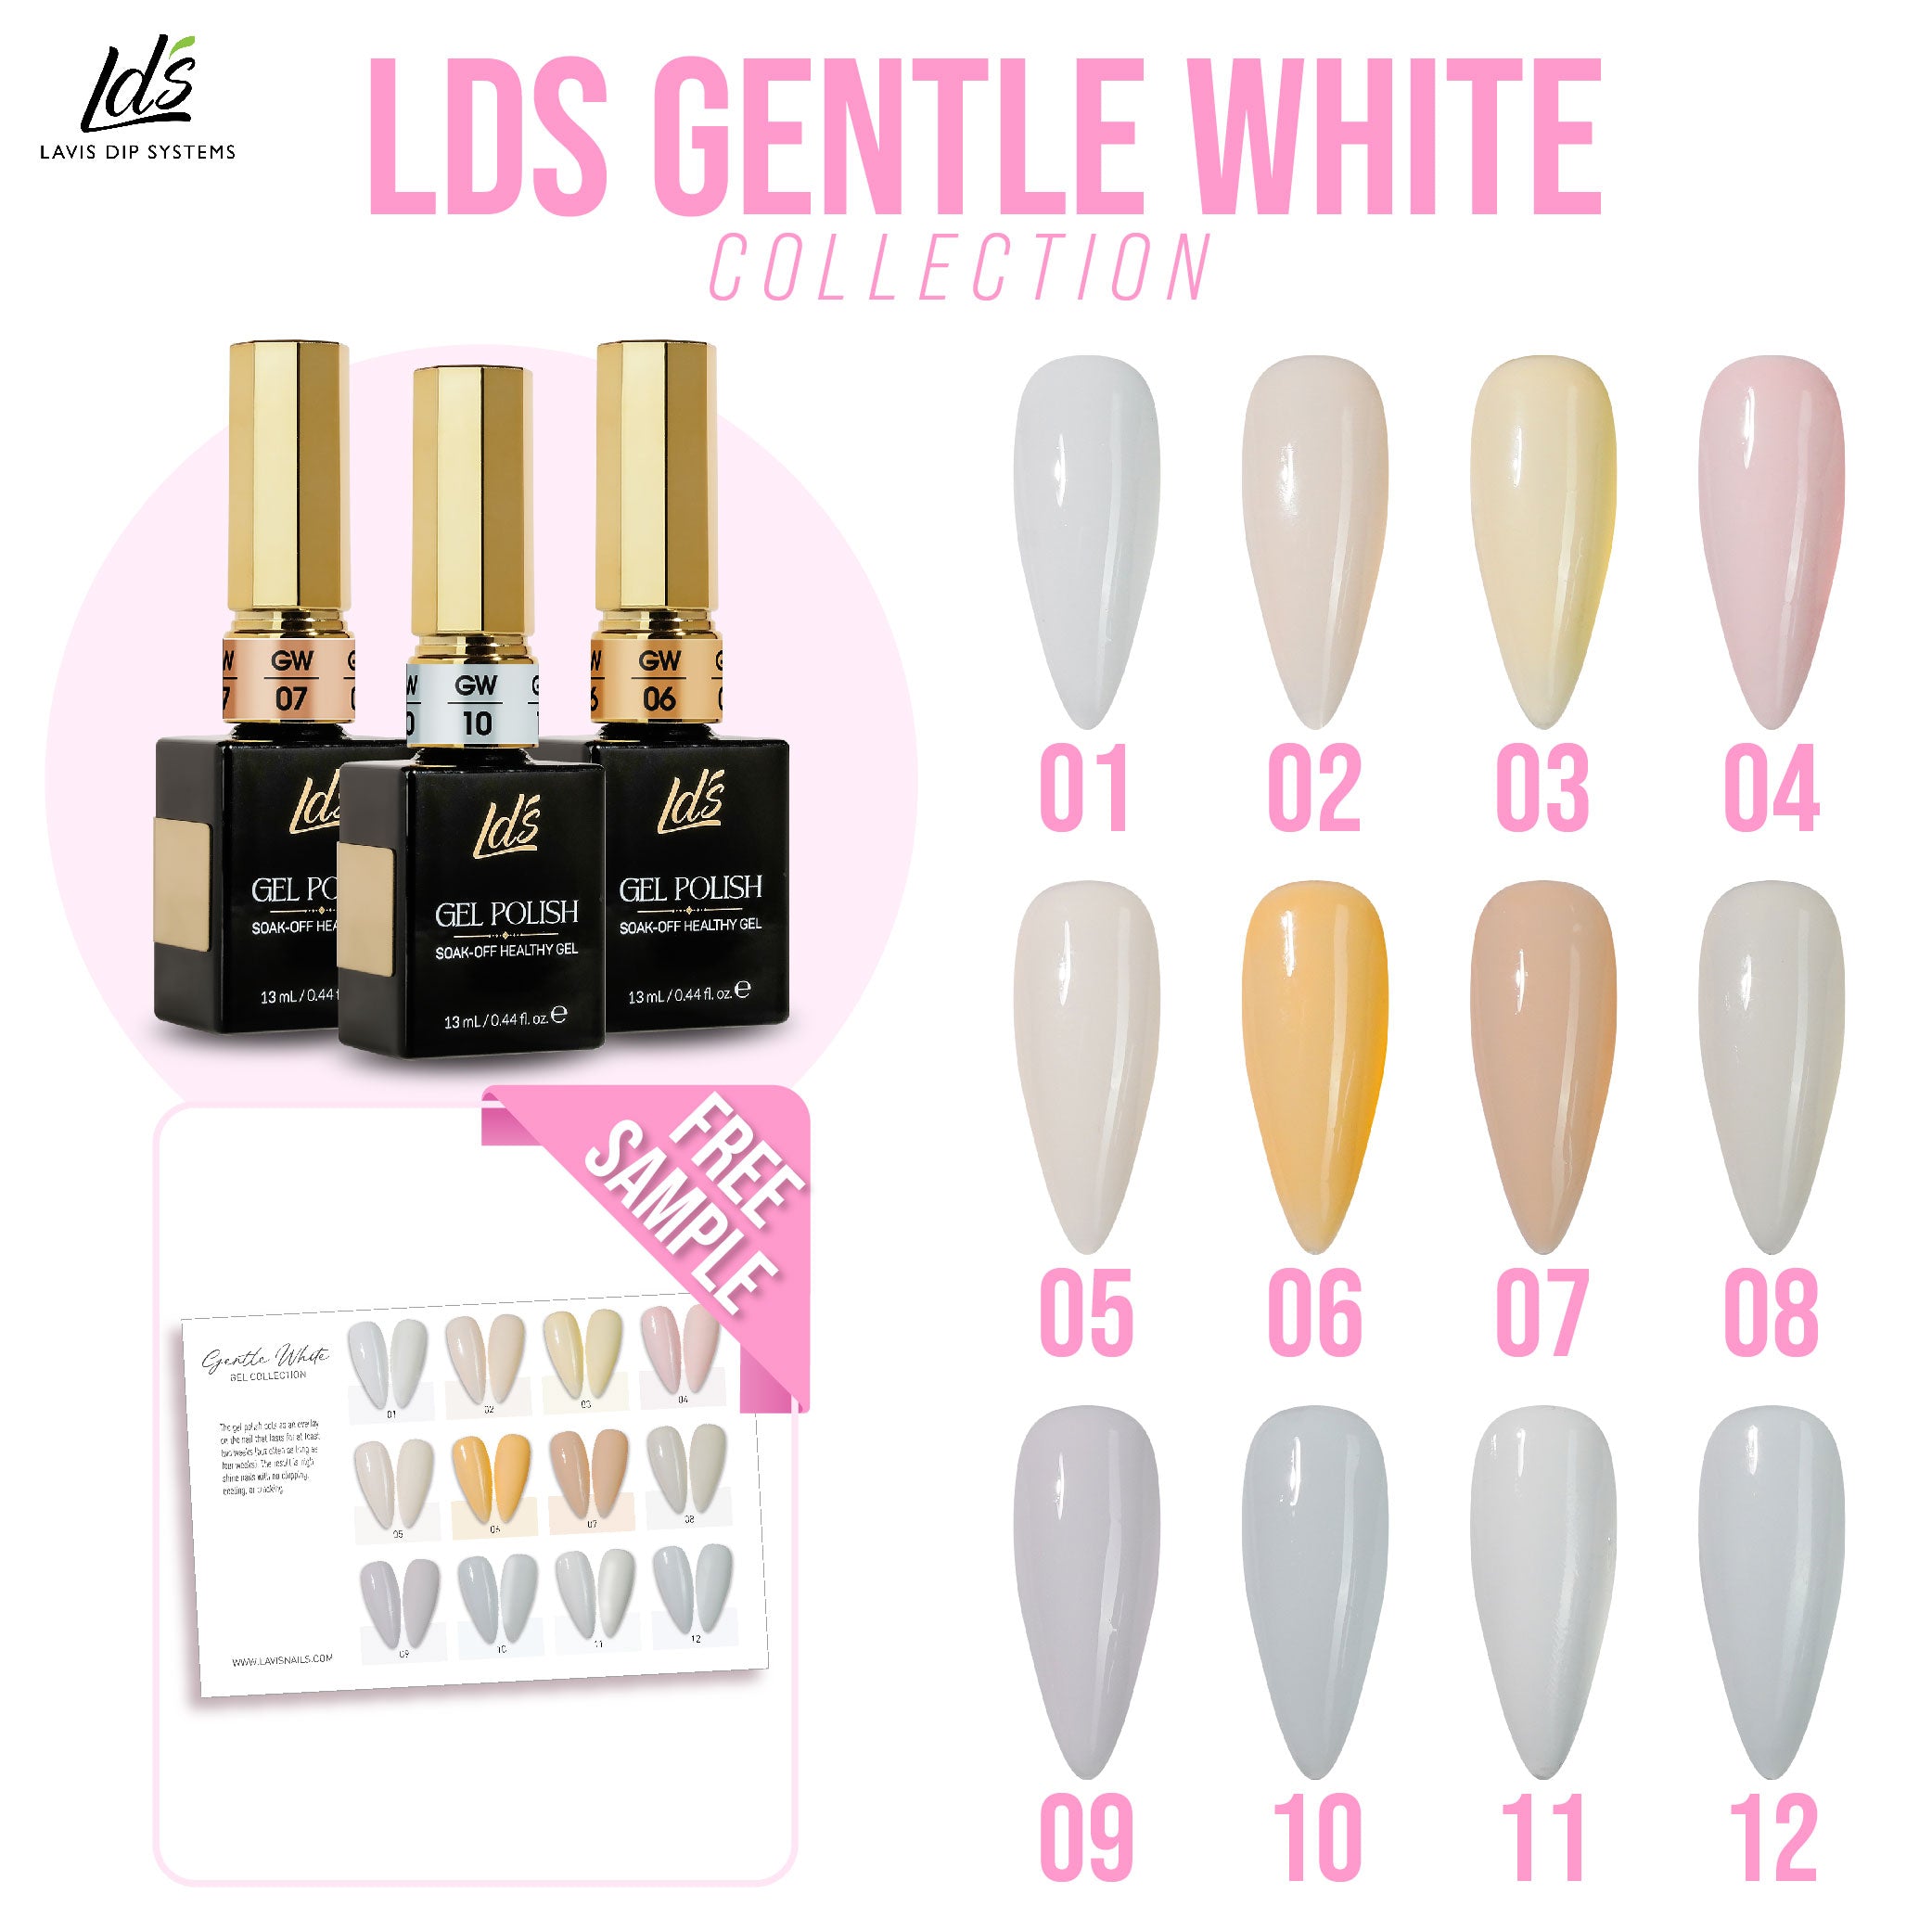 LDS GENTLE WHITE COLLECTION